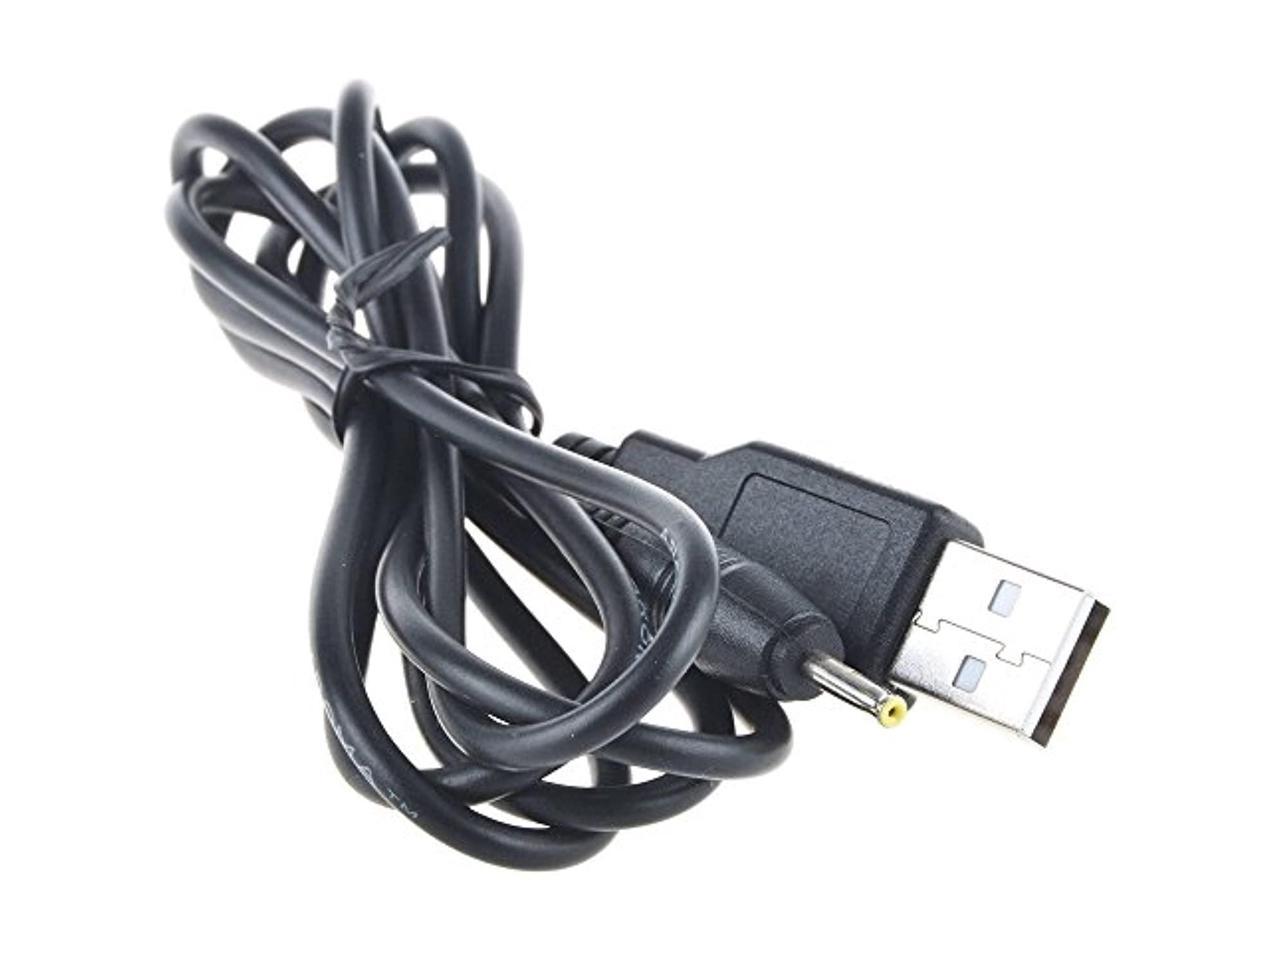 JVC GZ-HD300REK,GZ-HD300RER CAMERA REPLACEMENT USB DATA SYNC CABLE/LEAD 